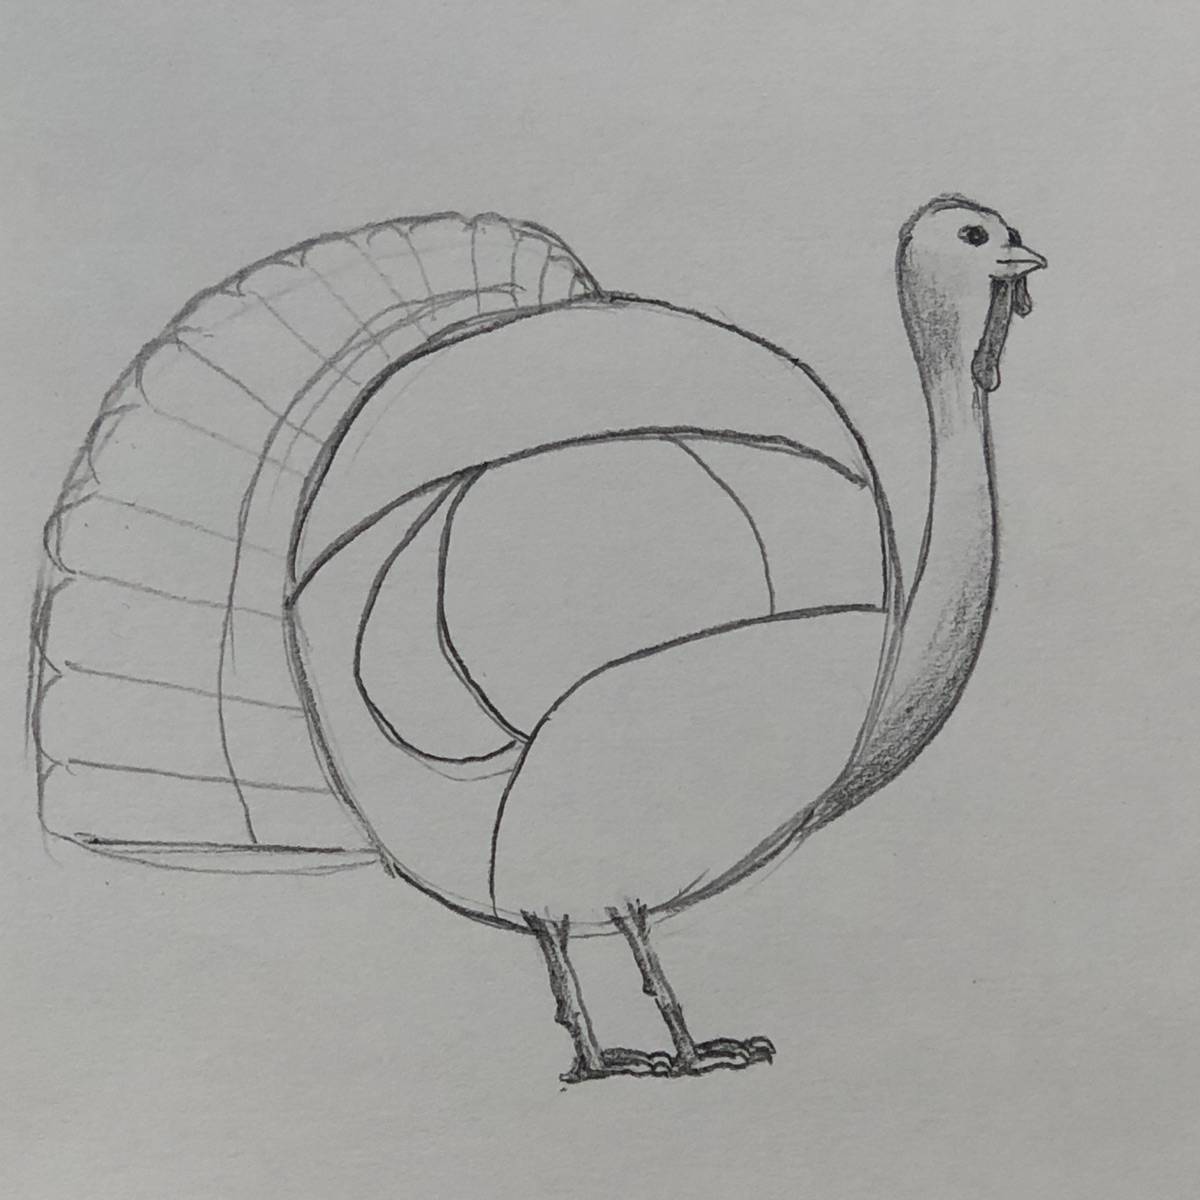 Beginning line-drawing sketch of a turkey with a scallop shape added to the tail and an arched line in the tail close to the body.